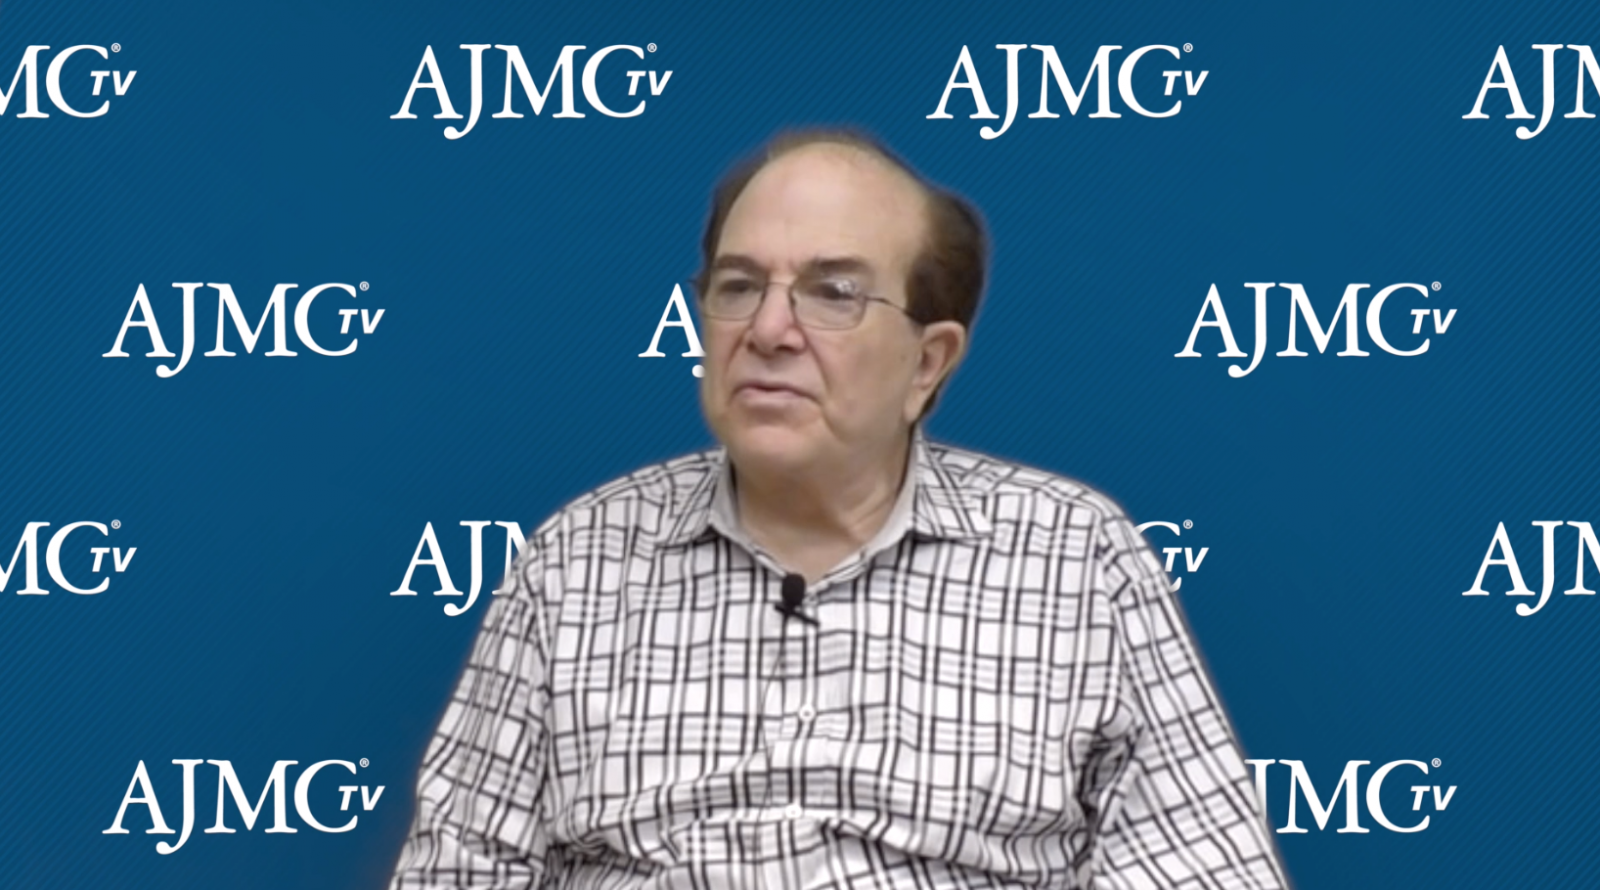 Dr Stephen Silberstein on How Patients Are Reacting to CGRP Inhibitors